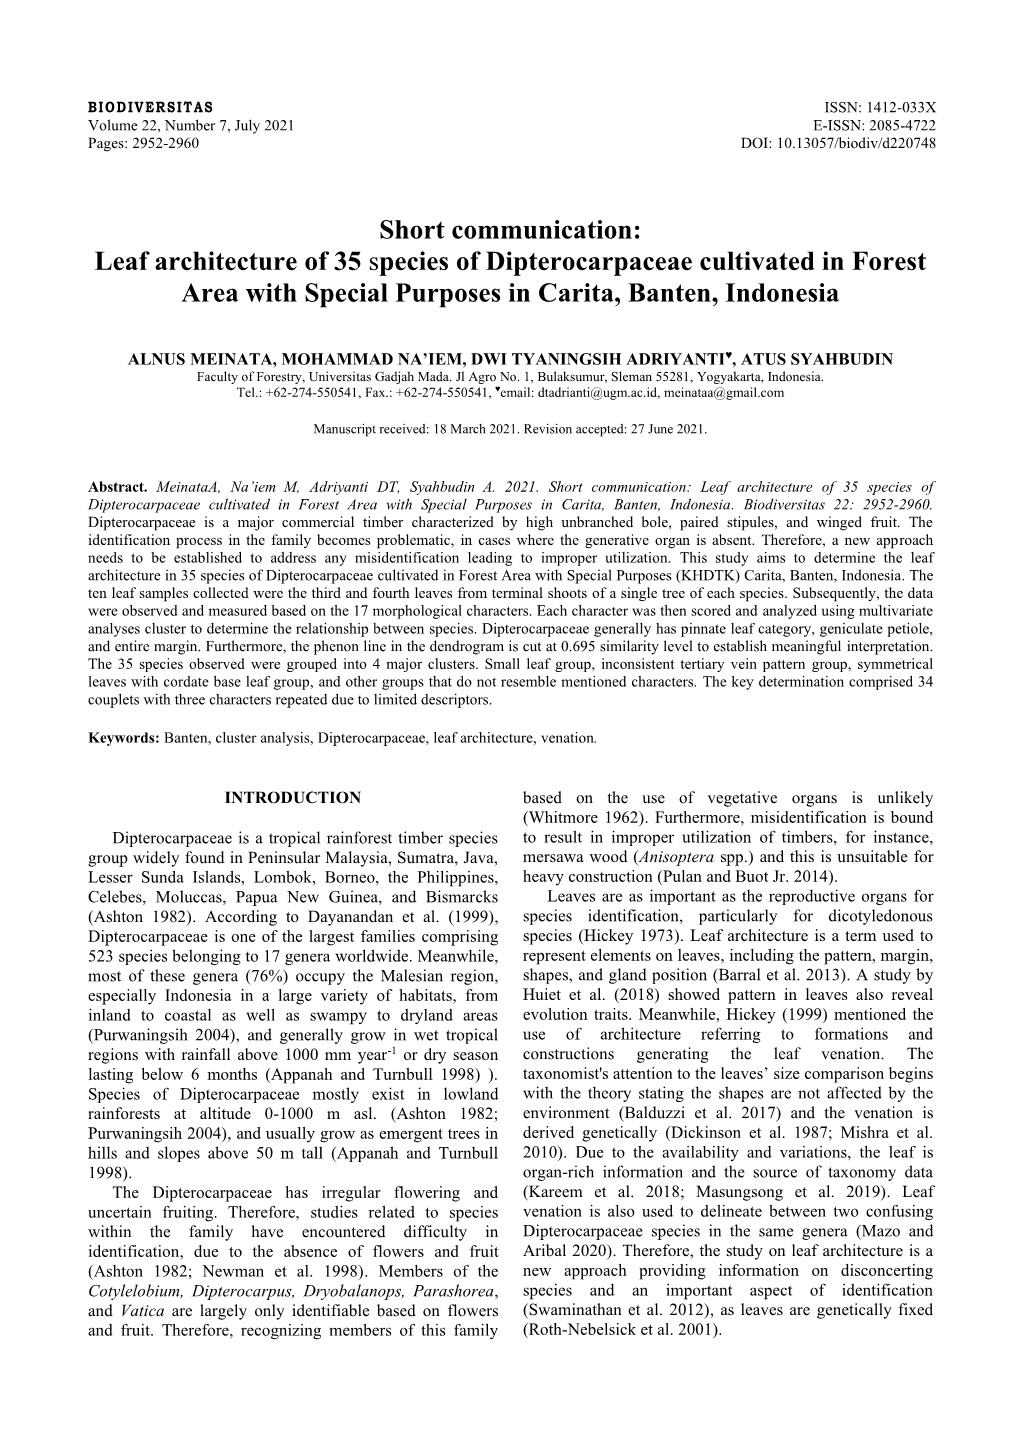 Leaf Architecture of 35 Species of Dipterocarpaceae Cultivated in Forest Area with Special Purposes in Carita, Banten, Indonesia